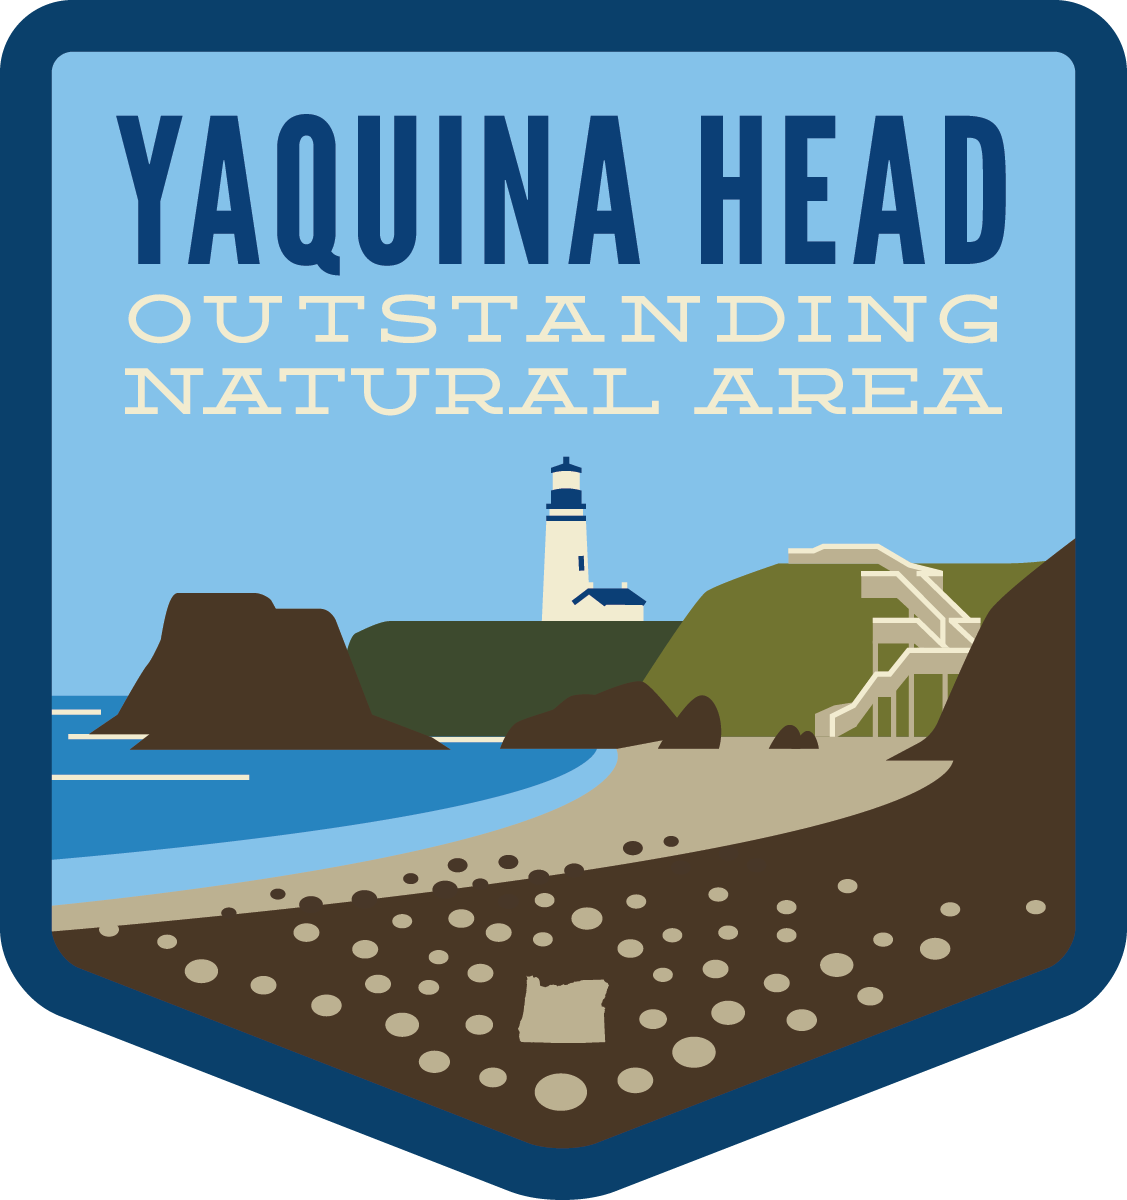 Yaquina Head Outstanding Natural Area Sticker